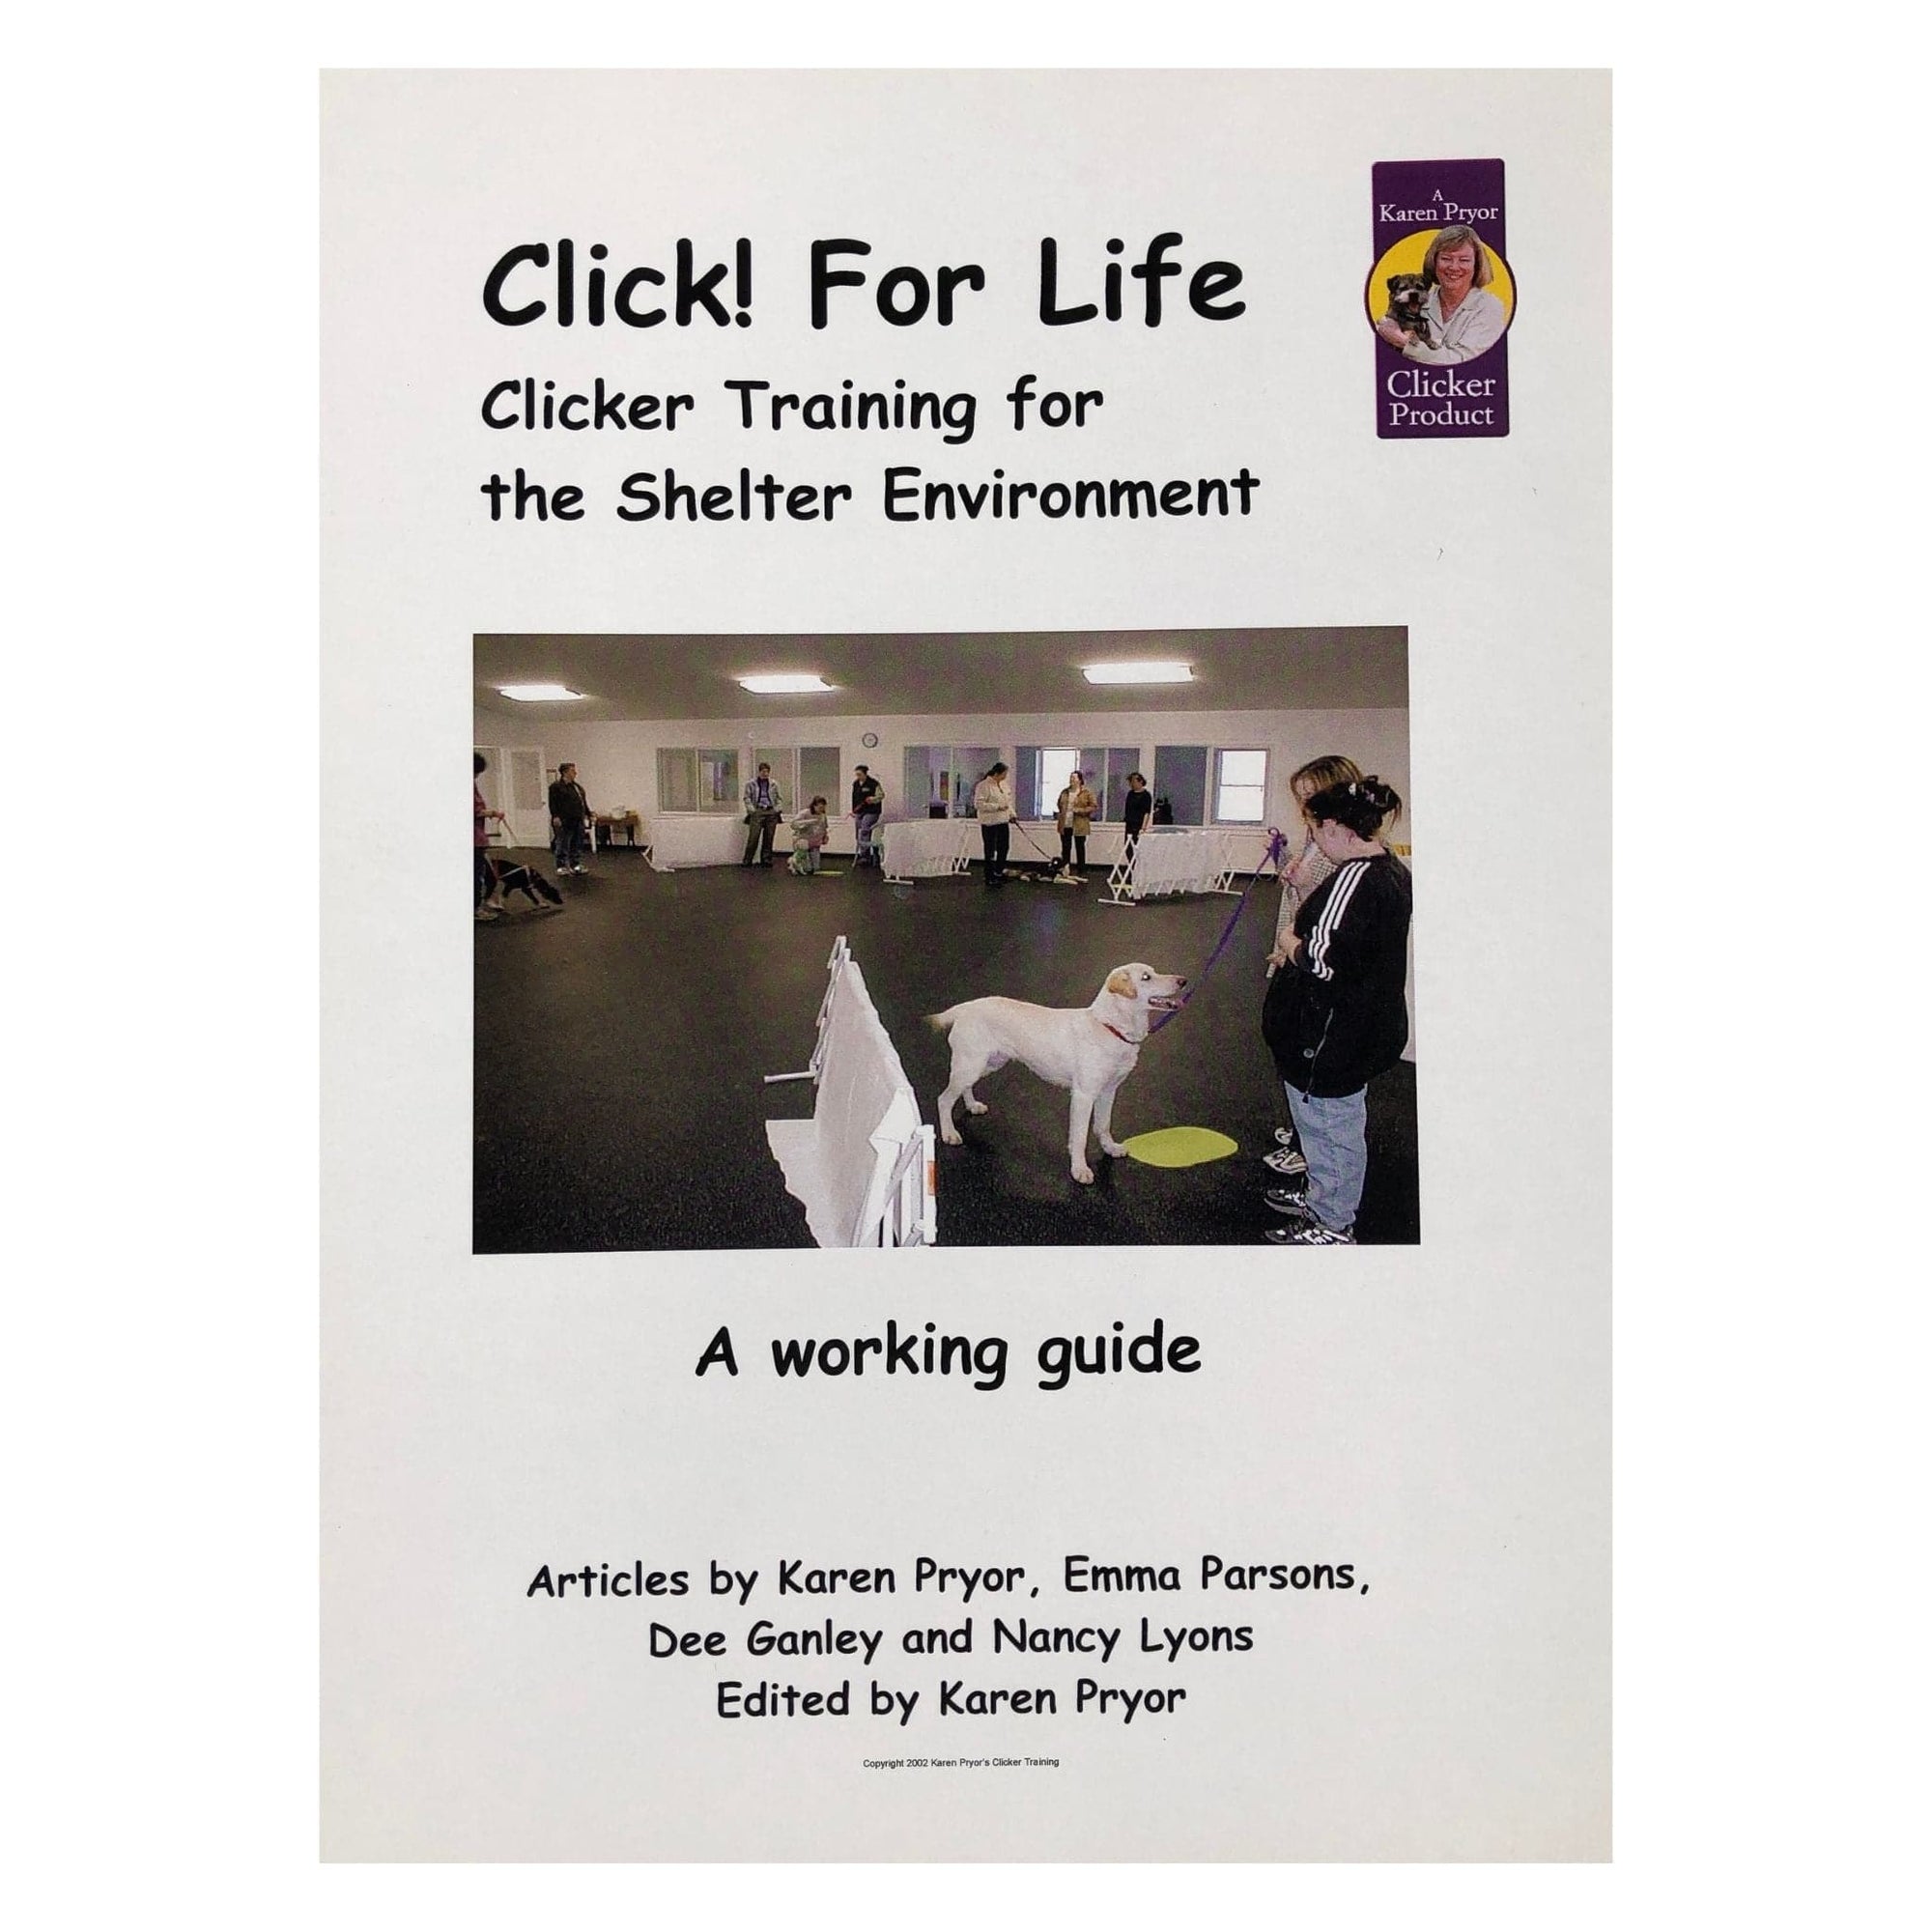 Click For Life! Clicker Training for the Shelter Environment by Karen Pryor, Emma Parsons, Dee Ganley, and Nancy Lyon